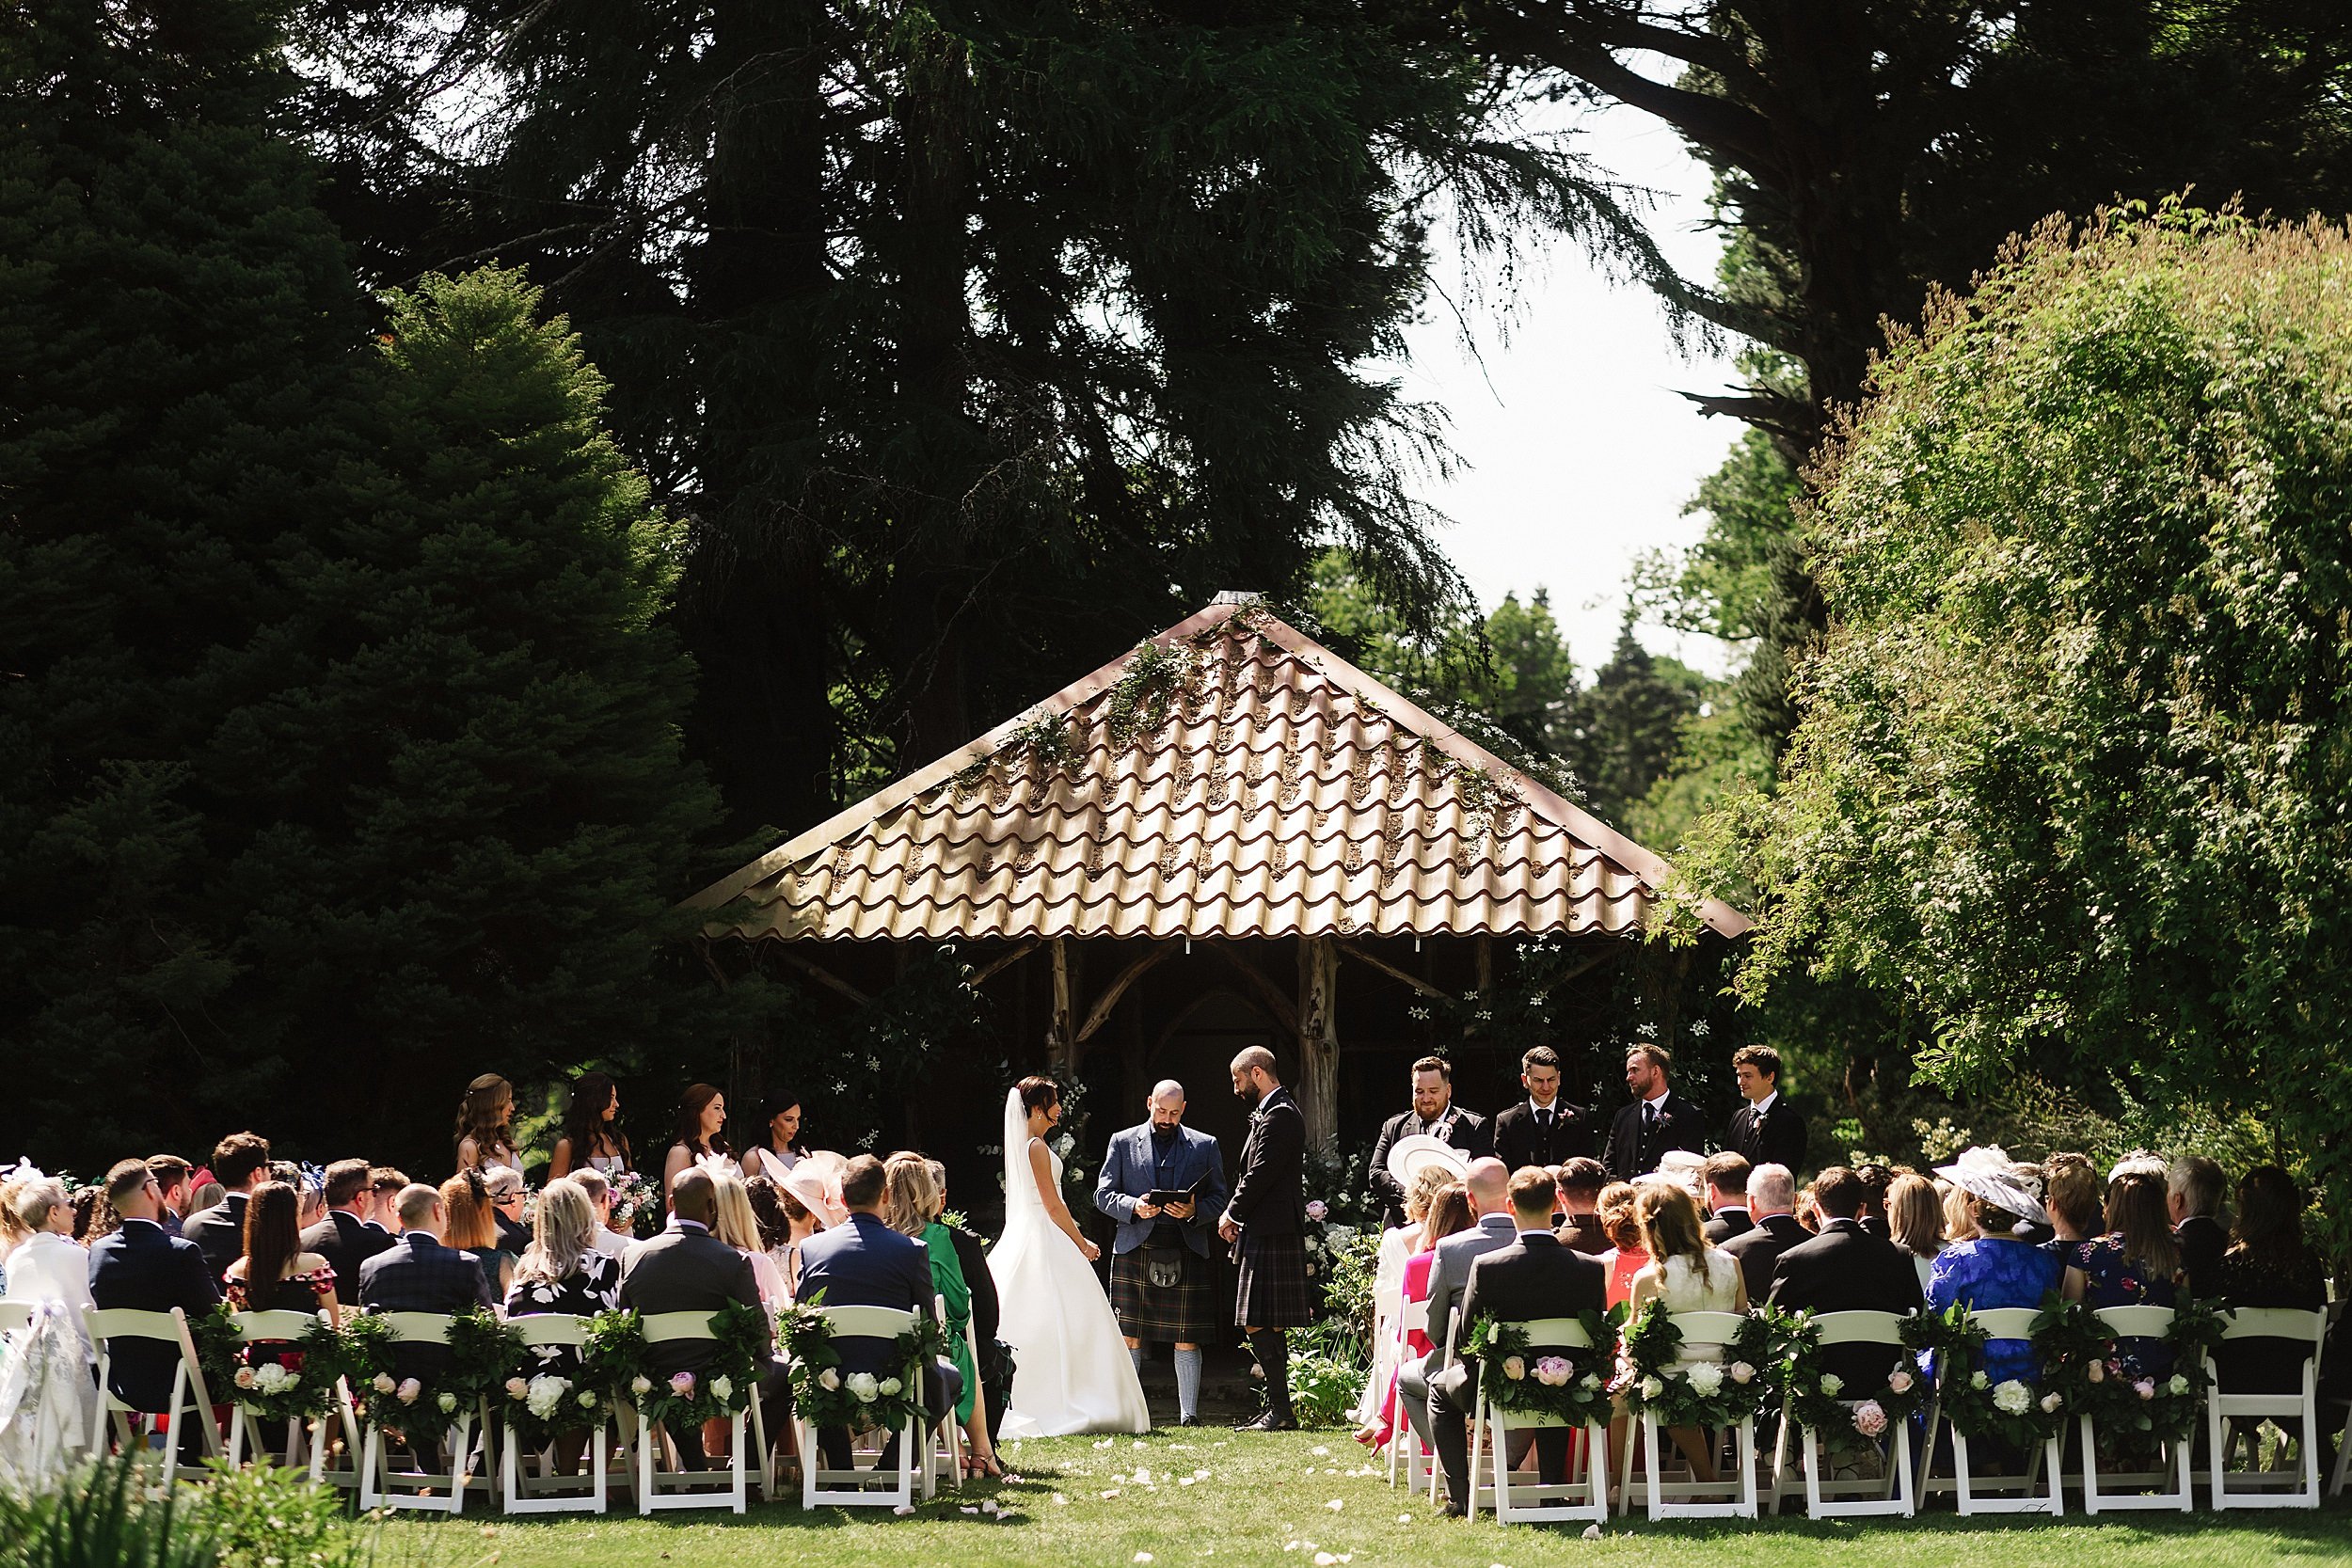 guests seated on white chairs in front of a wooden gazebo in the gardens of errol park wedding venue in scotland watch the officiant conduct the wedding ceremony for the bride and groom